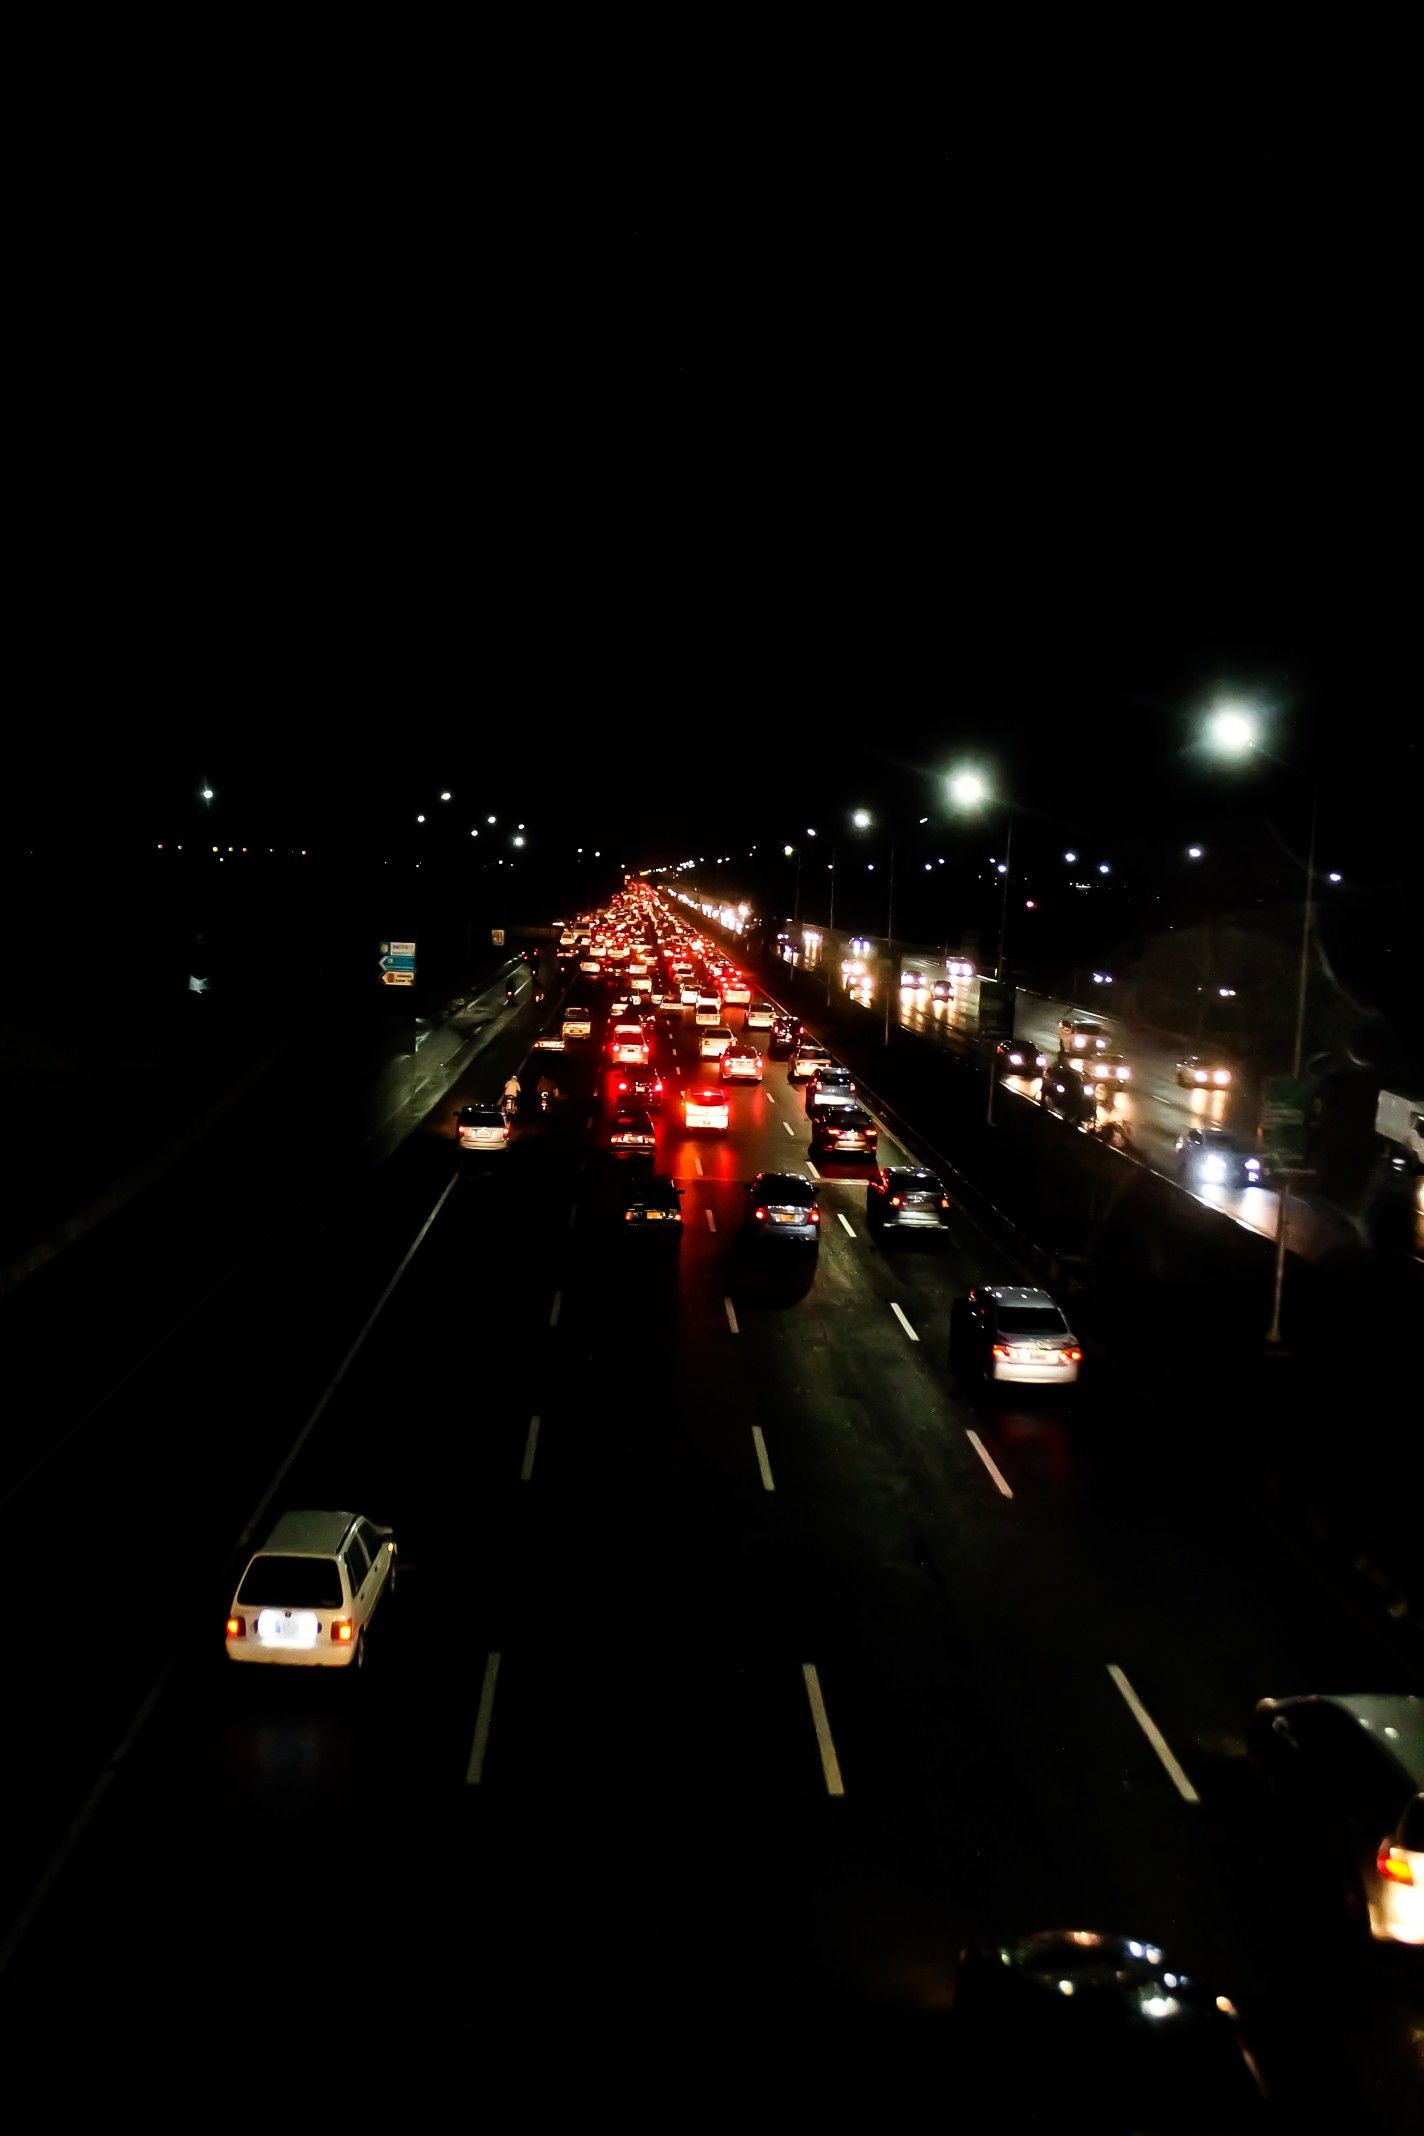 The road was new to me, as roads always are, going back. Night time photography, Night city, Night aesthetic